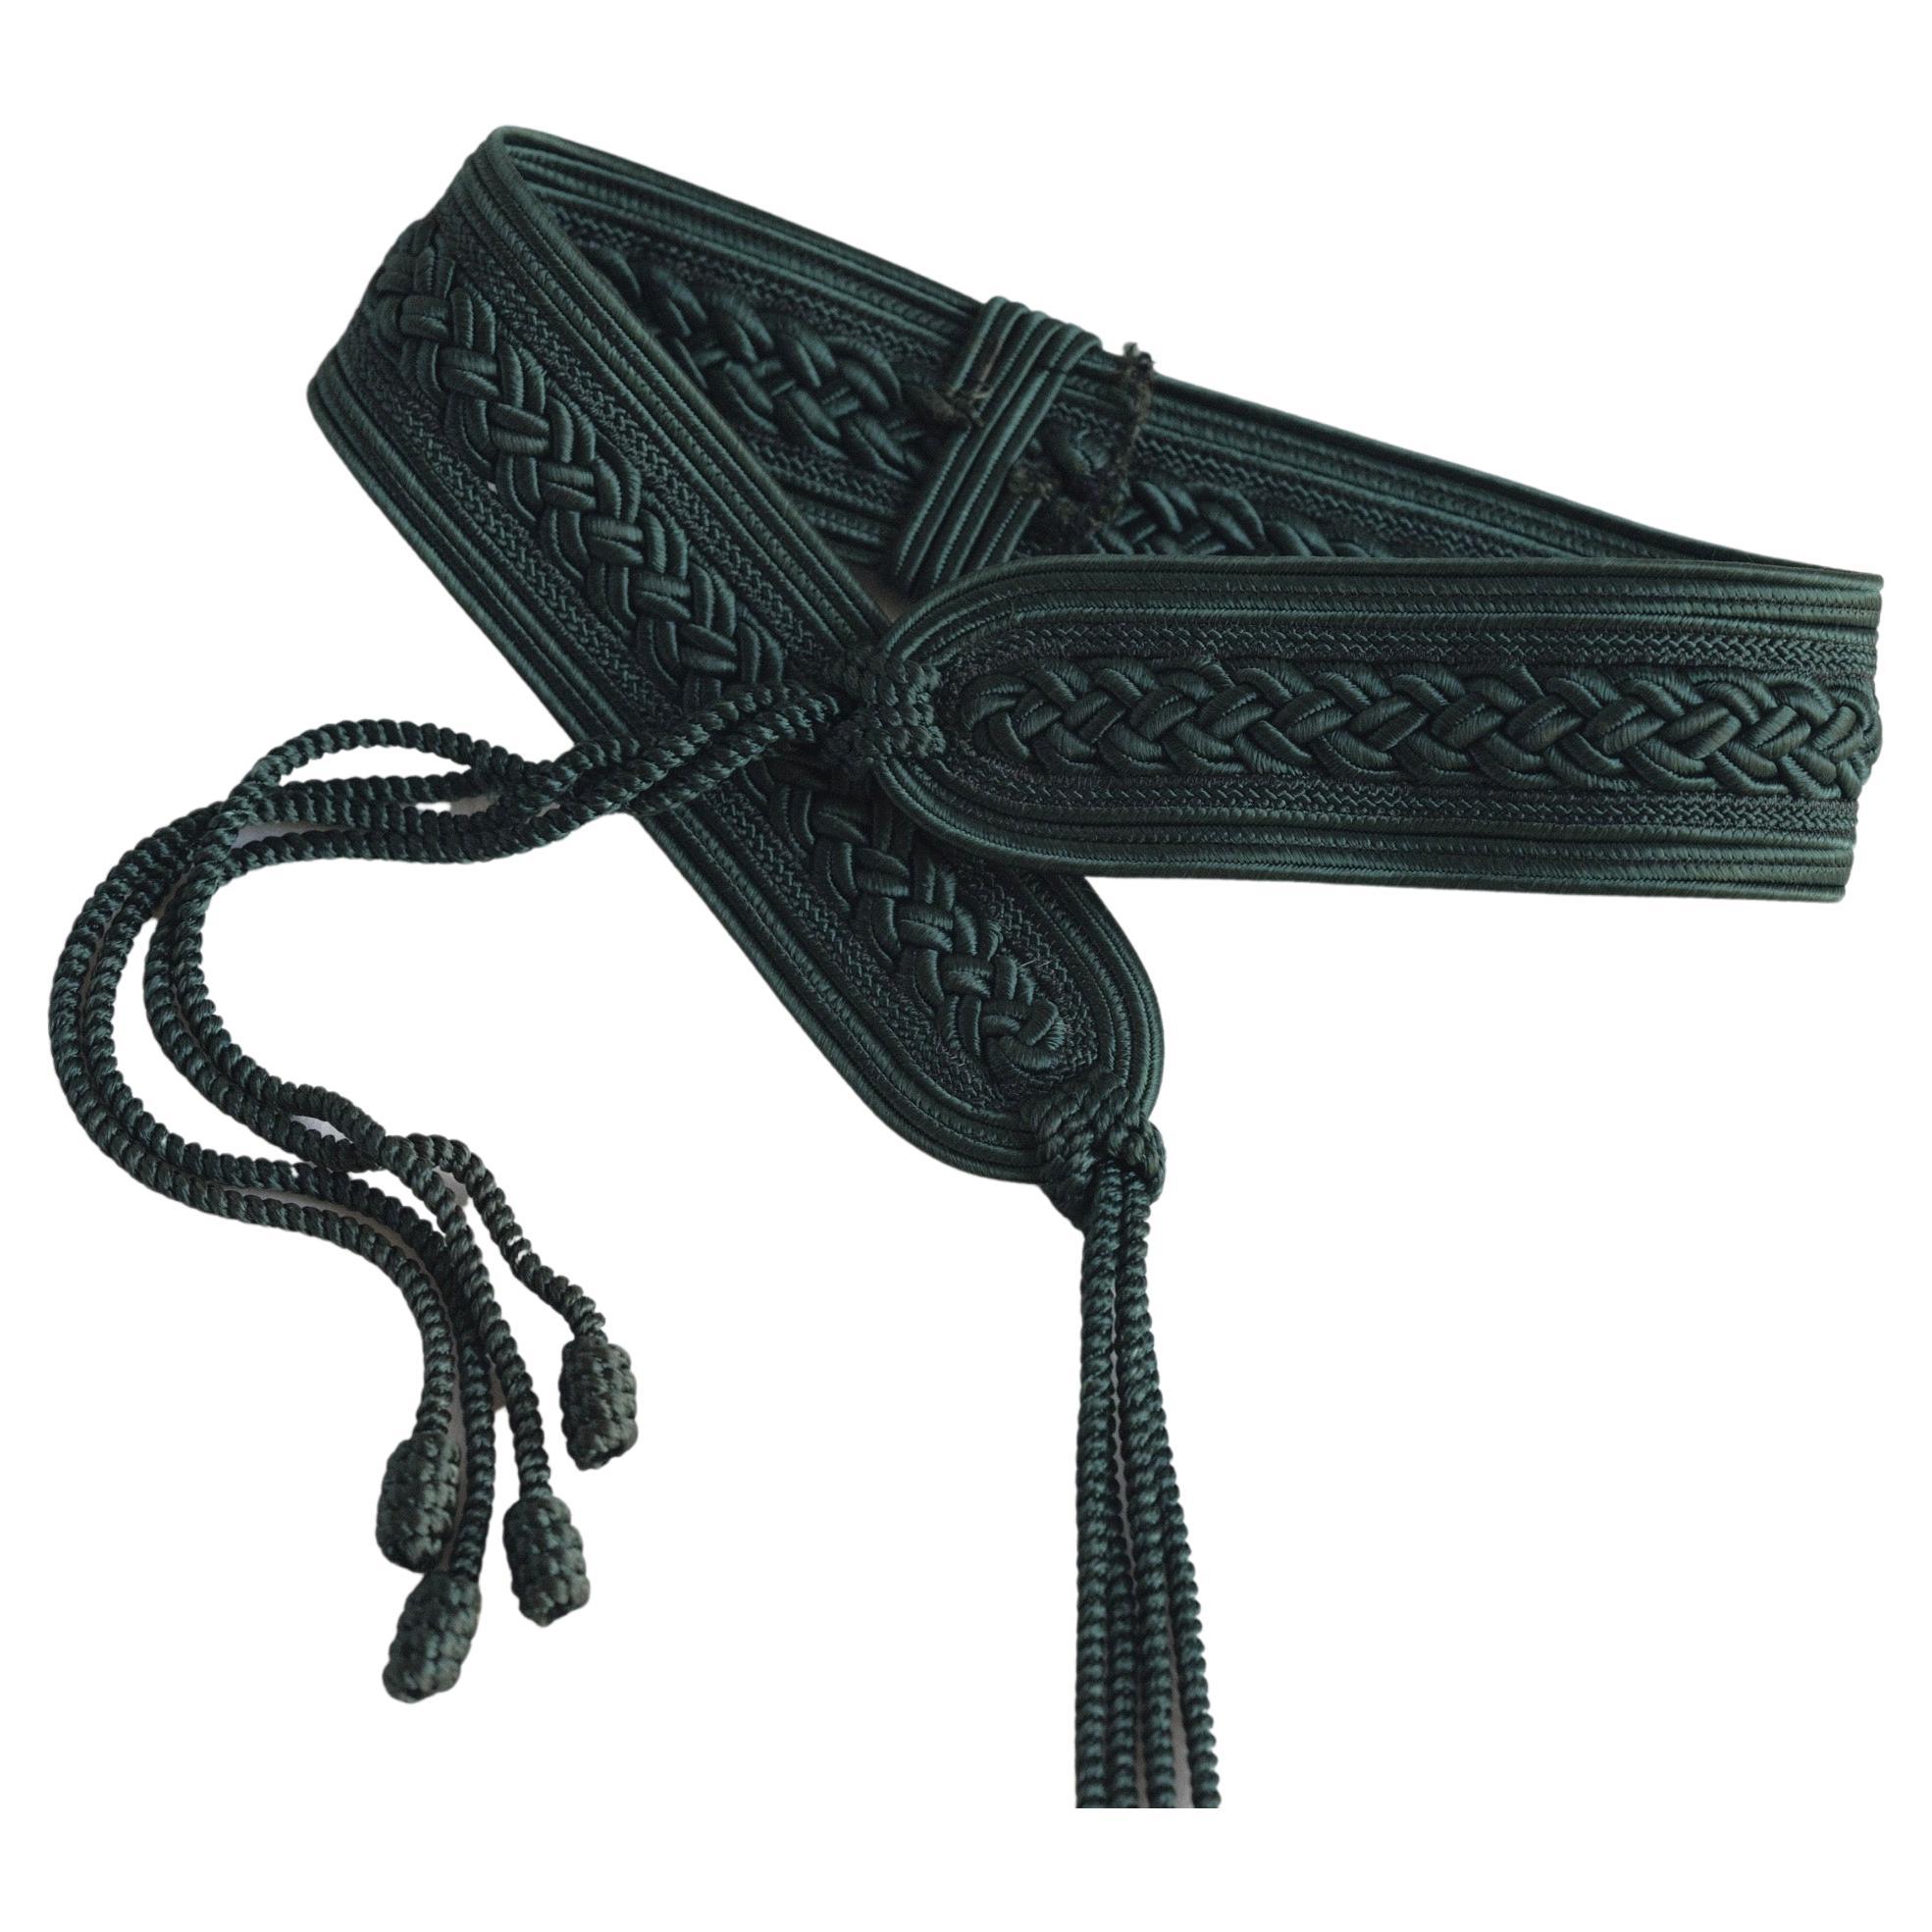 Nina Ricci Passamenterie Belt with Tassels 
Deep green
Four tassels at tie closure
Braided detail 
Circa 1980's or 1990's 
Total Length: 52 inches
Width: 2.25 inches
Waist Size closed at smallest: 27 inches
Open sizing beyond 27 inch waist
Tassel